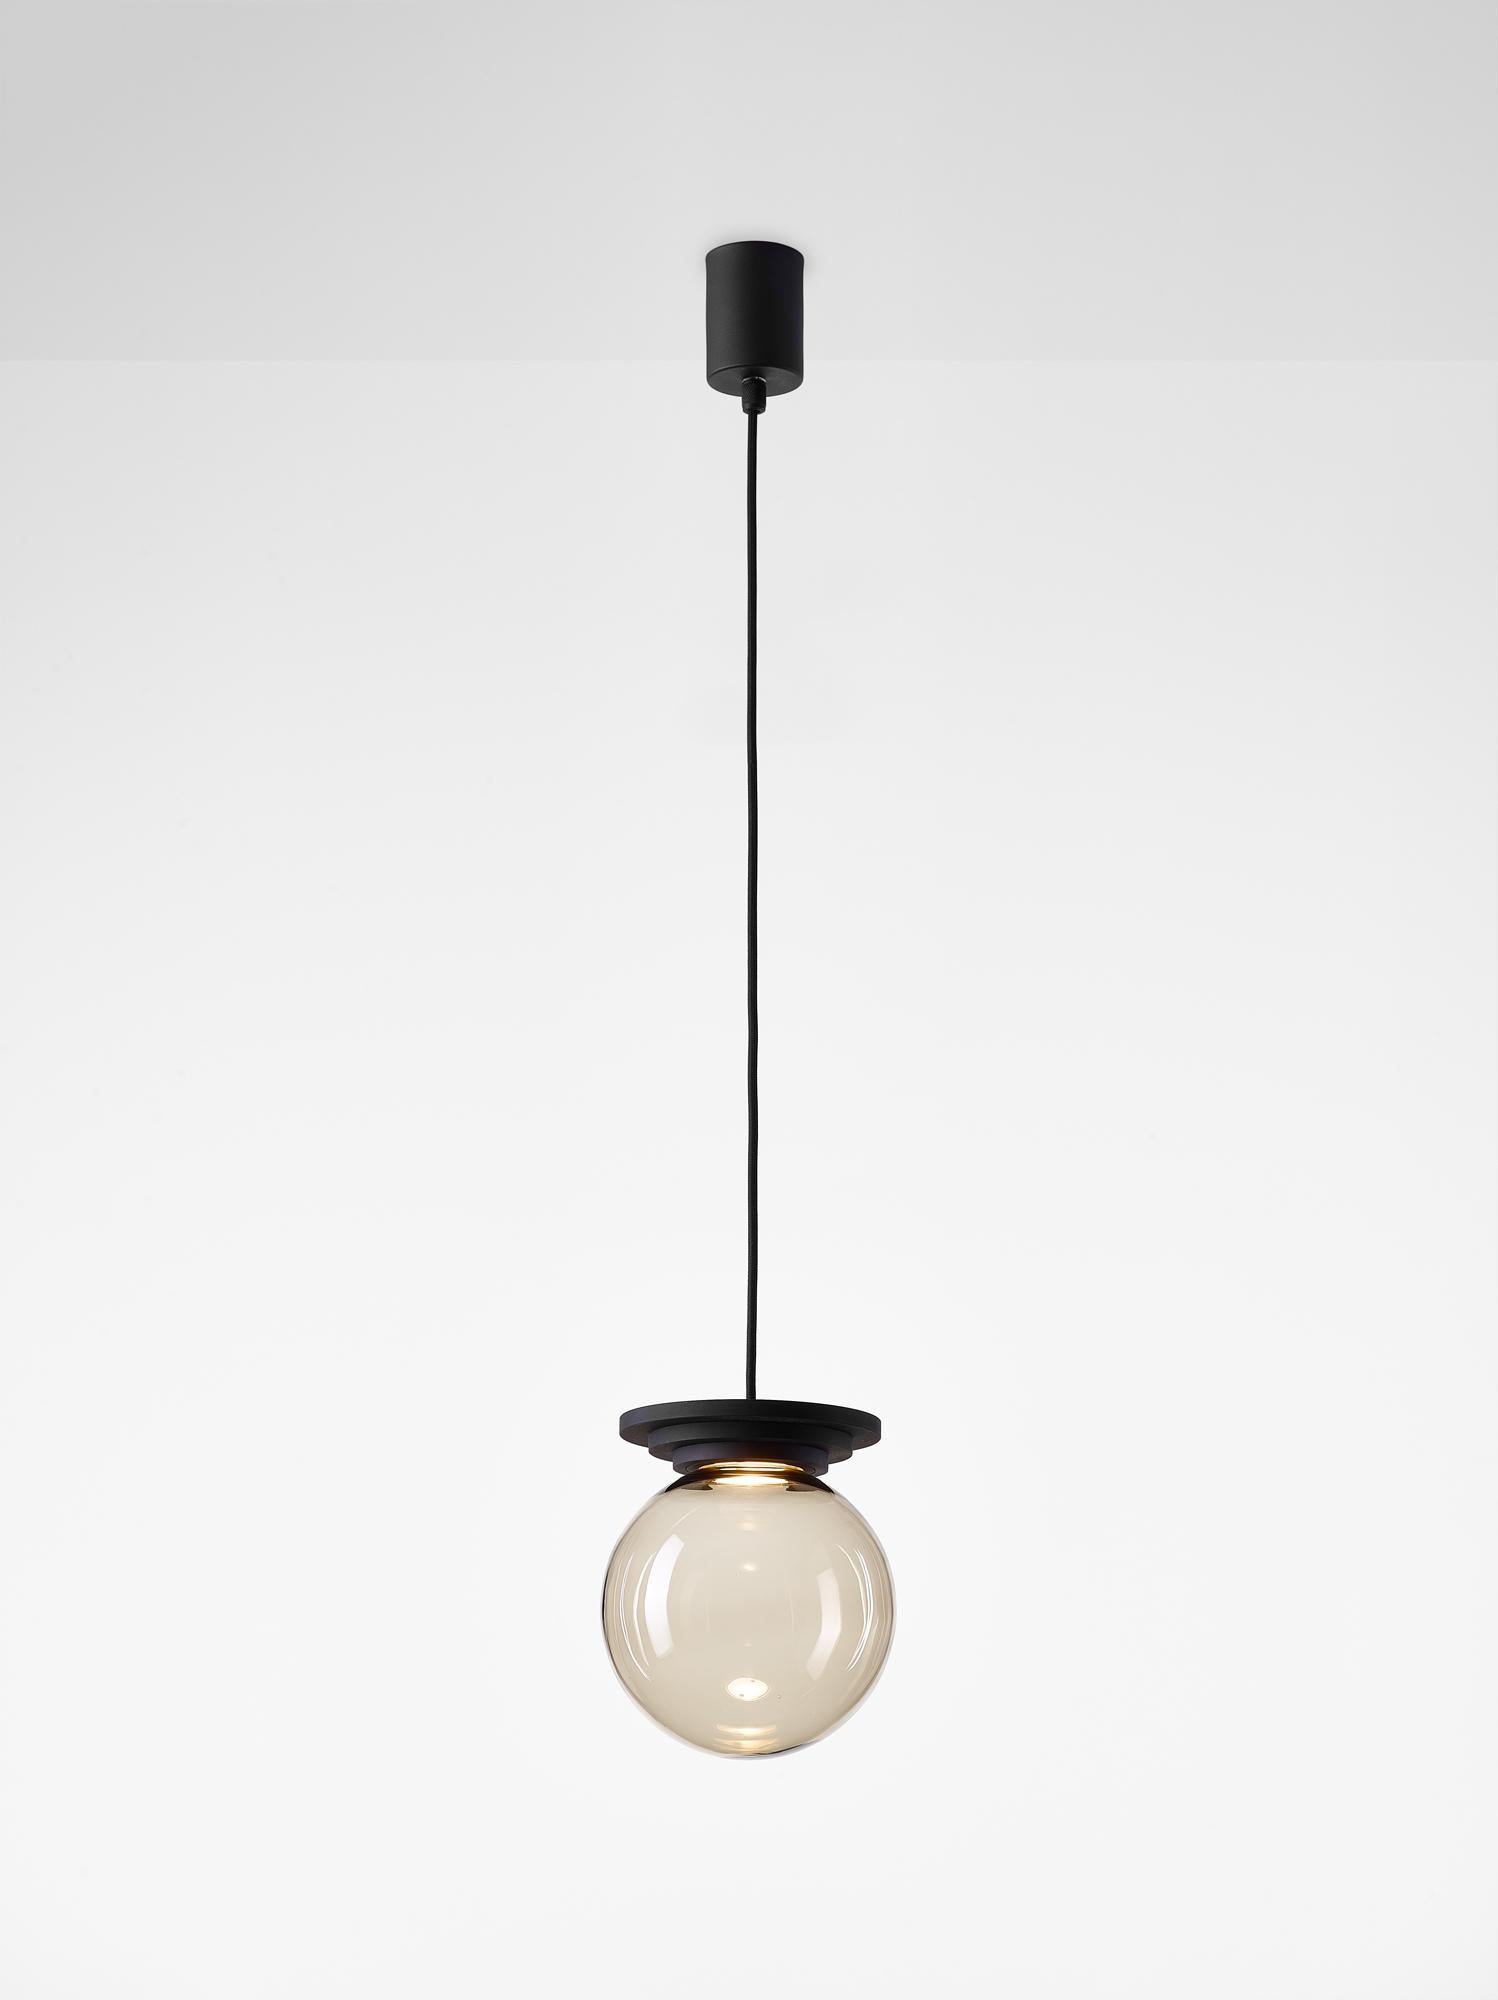 Set of 2 black stratos ball pendant light by Dechem Studio
Dimensions: D 18 x H 20 cm
Materials: Aluminum, Glass.
Also Available: Different colours available.

Different shapes of capsules and spheres contrast with anodized alloy fixtures,